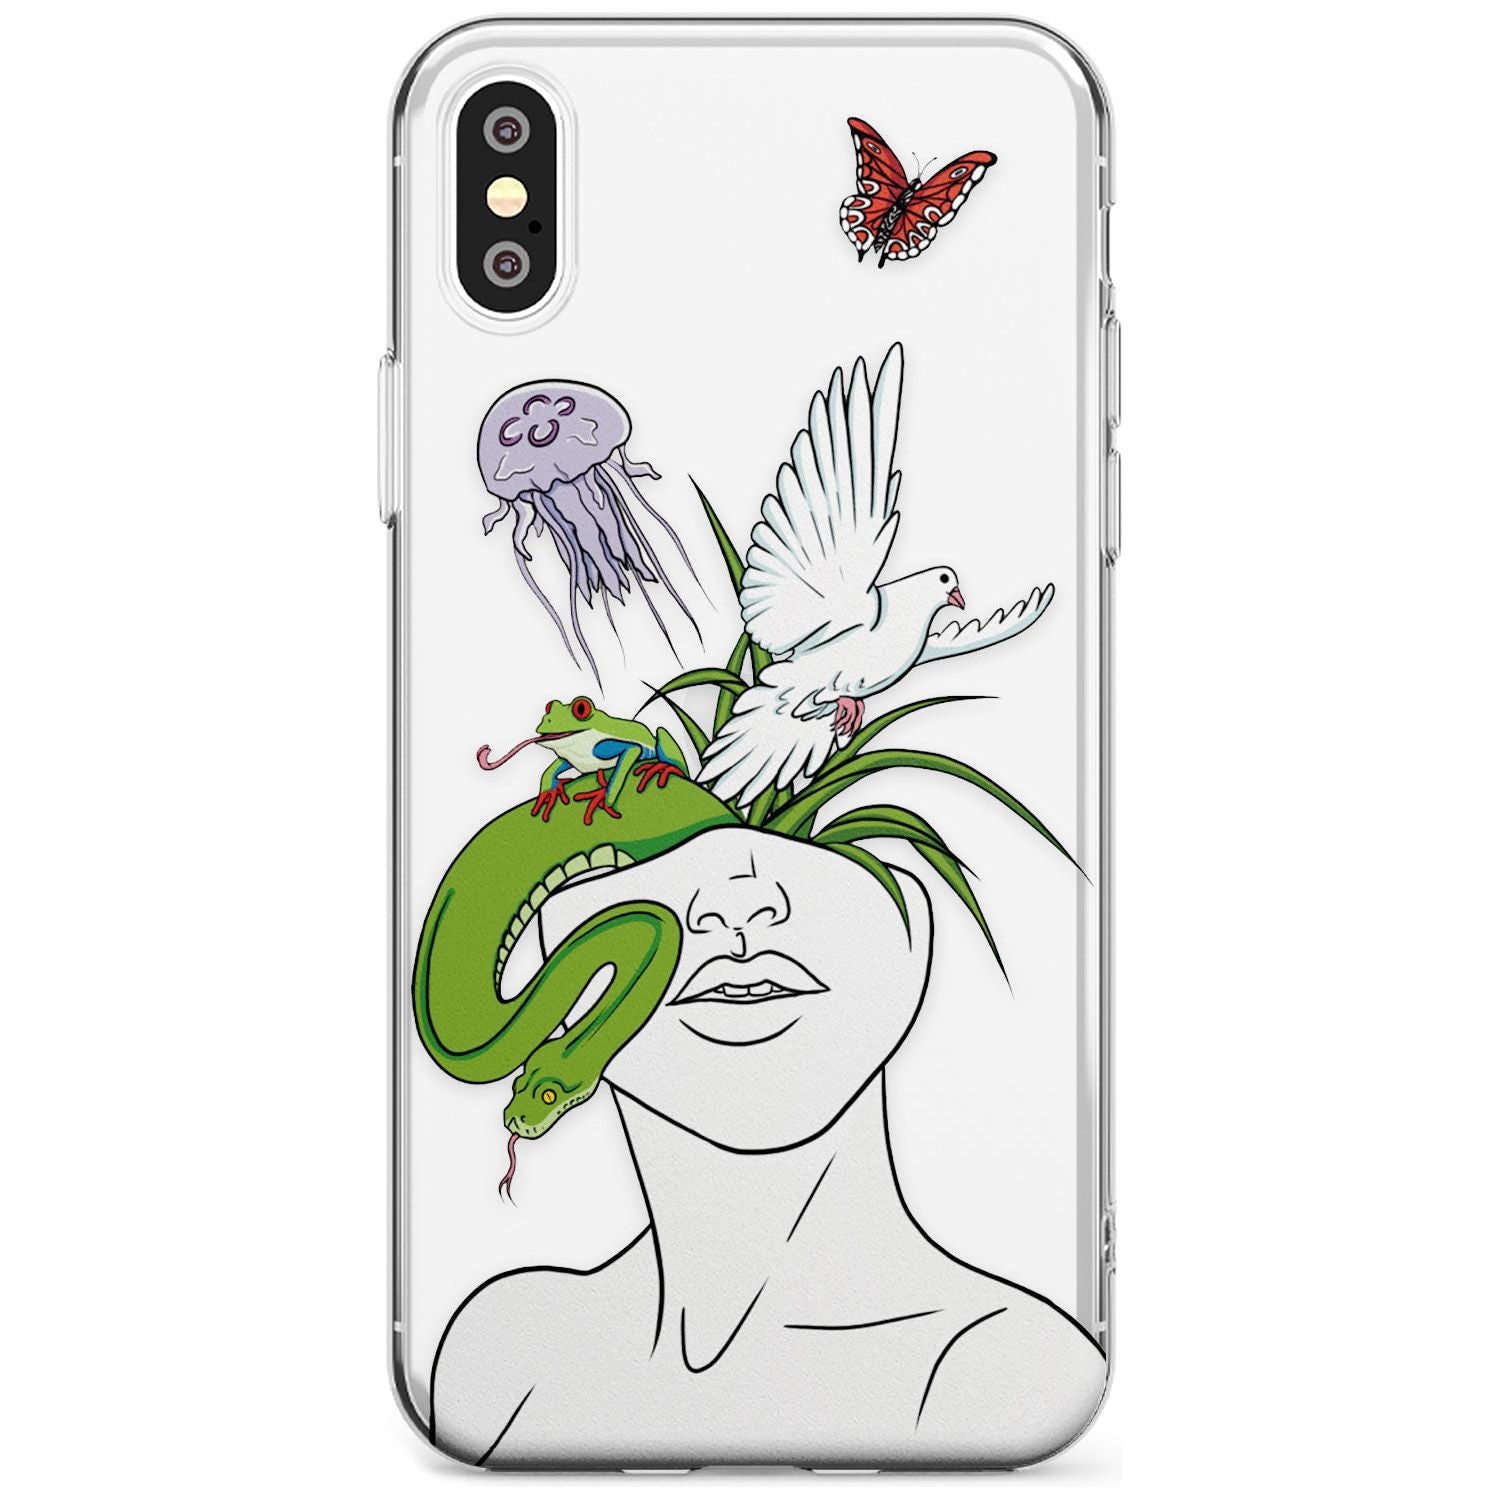 WILD THOUGHTS Black Impact Phone Case for iPhone X XS Max XR